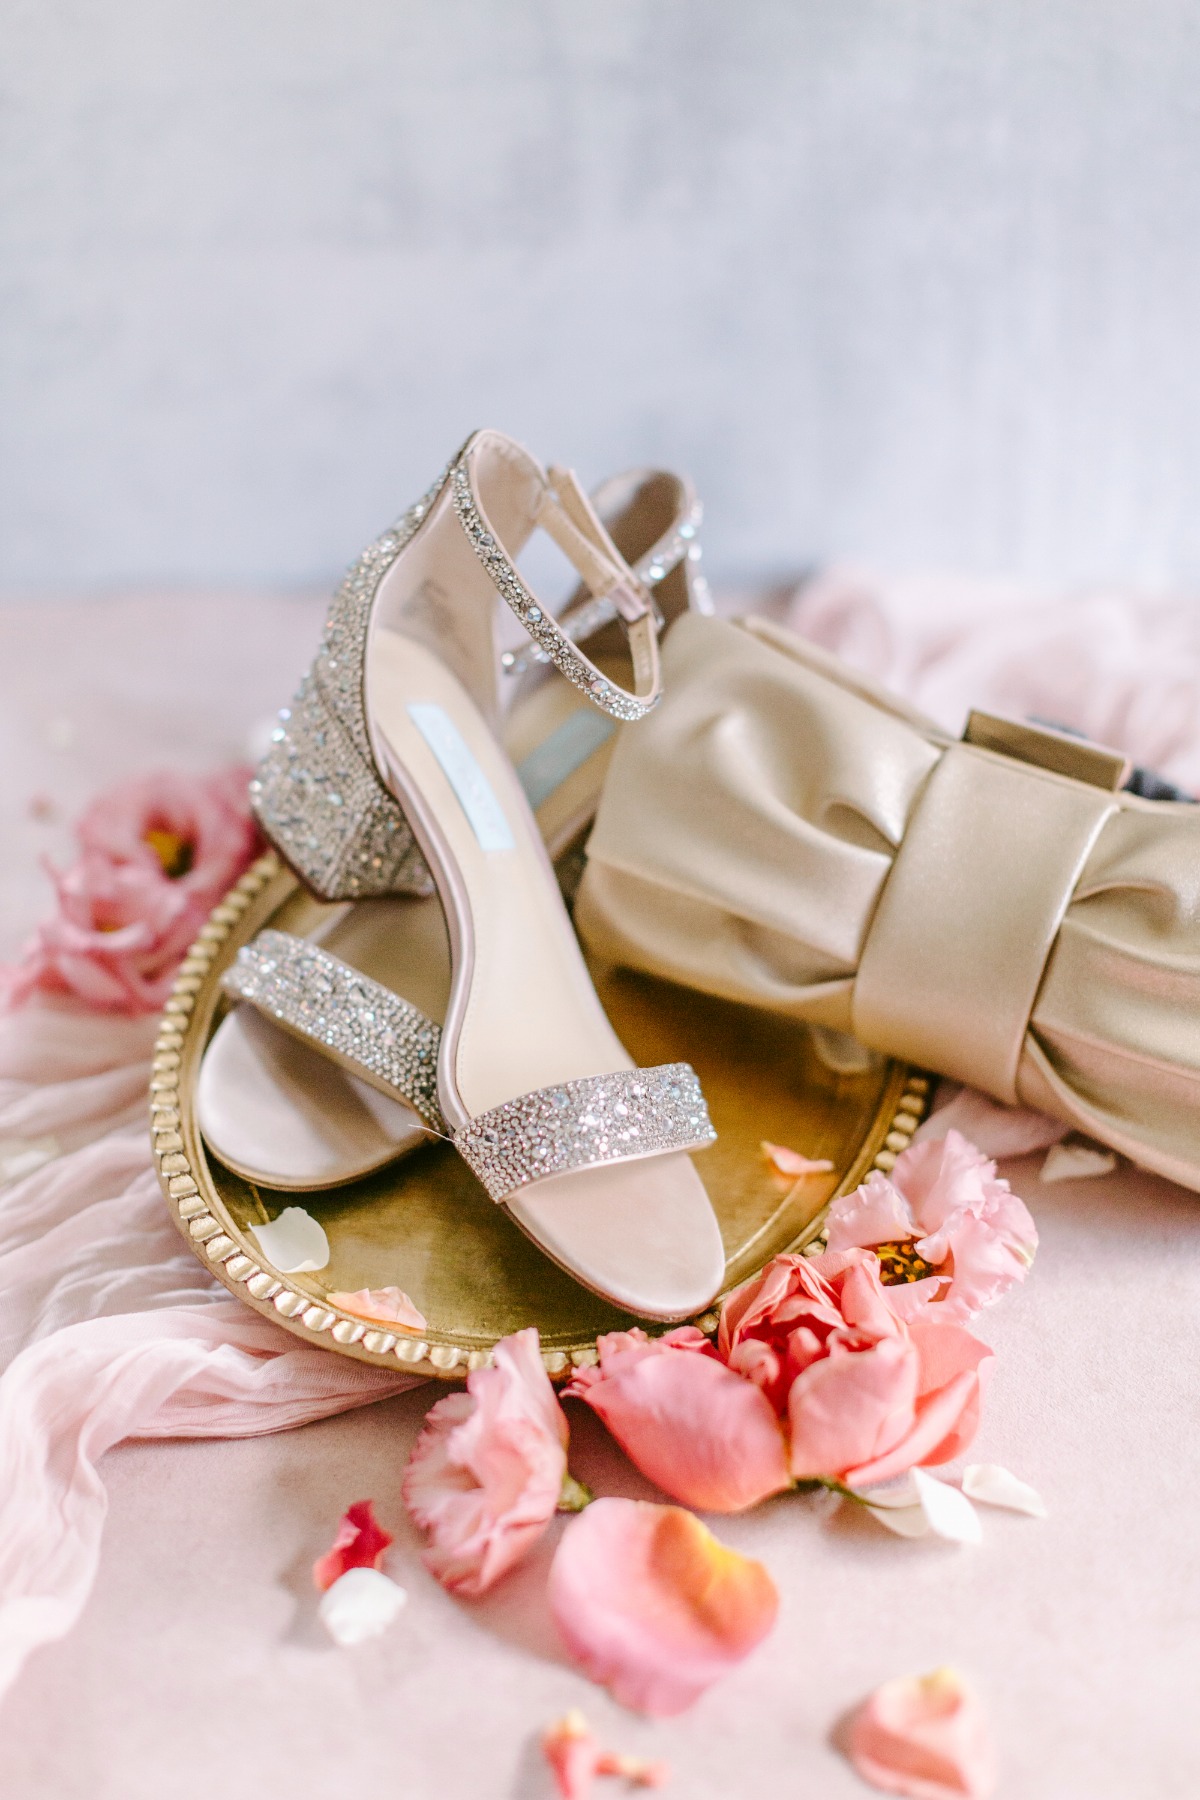 Wedding shoes and purse on gold tray surrounded by pink petals